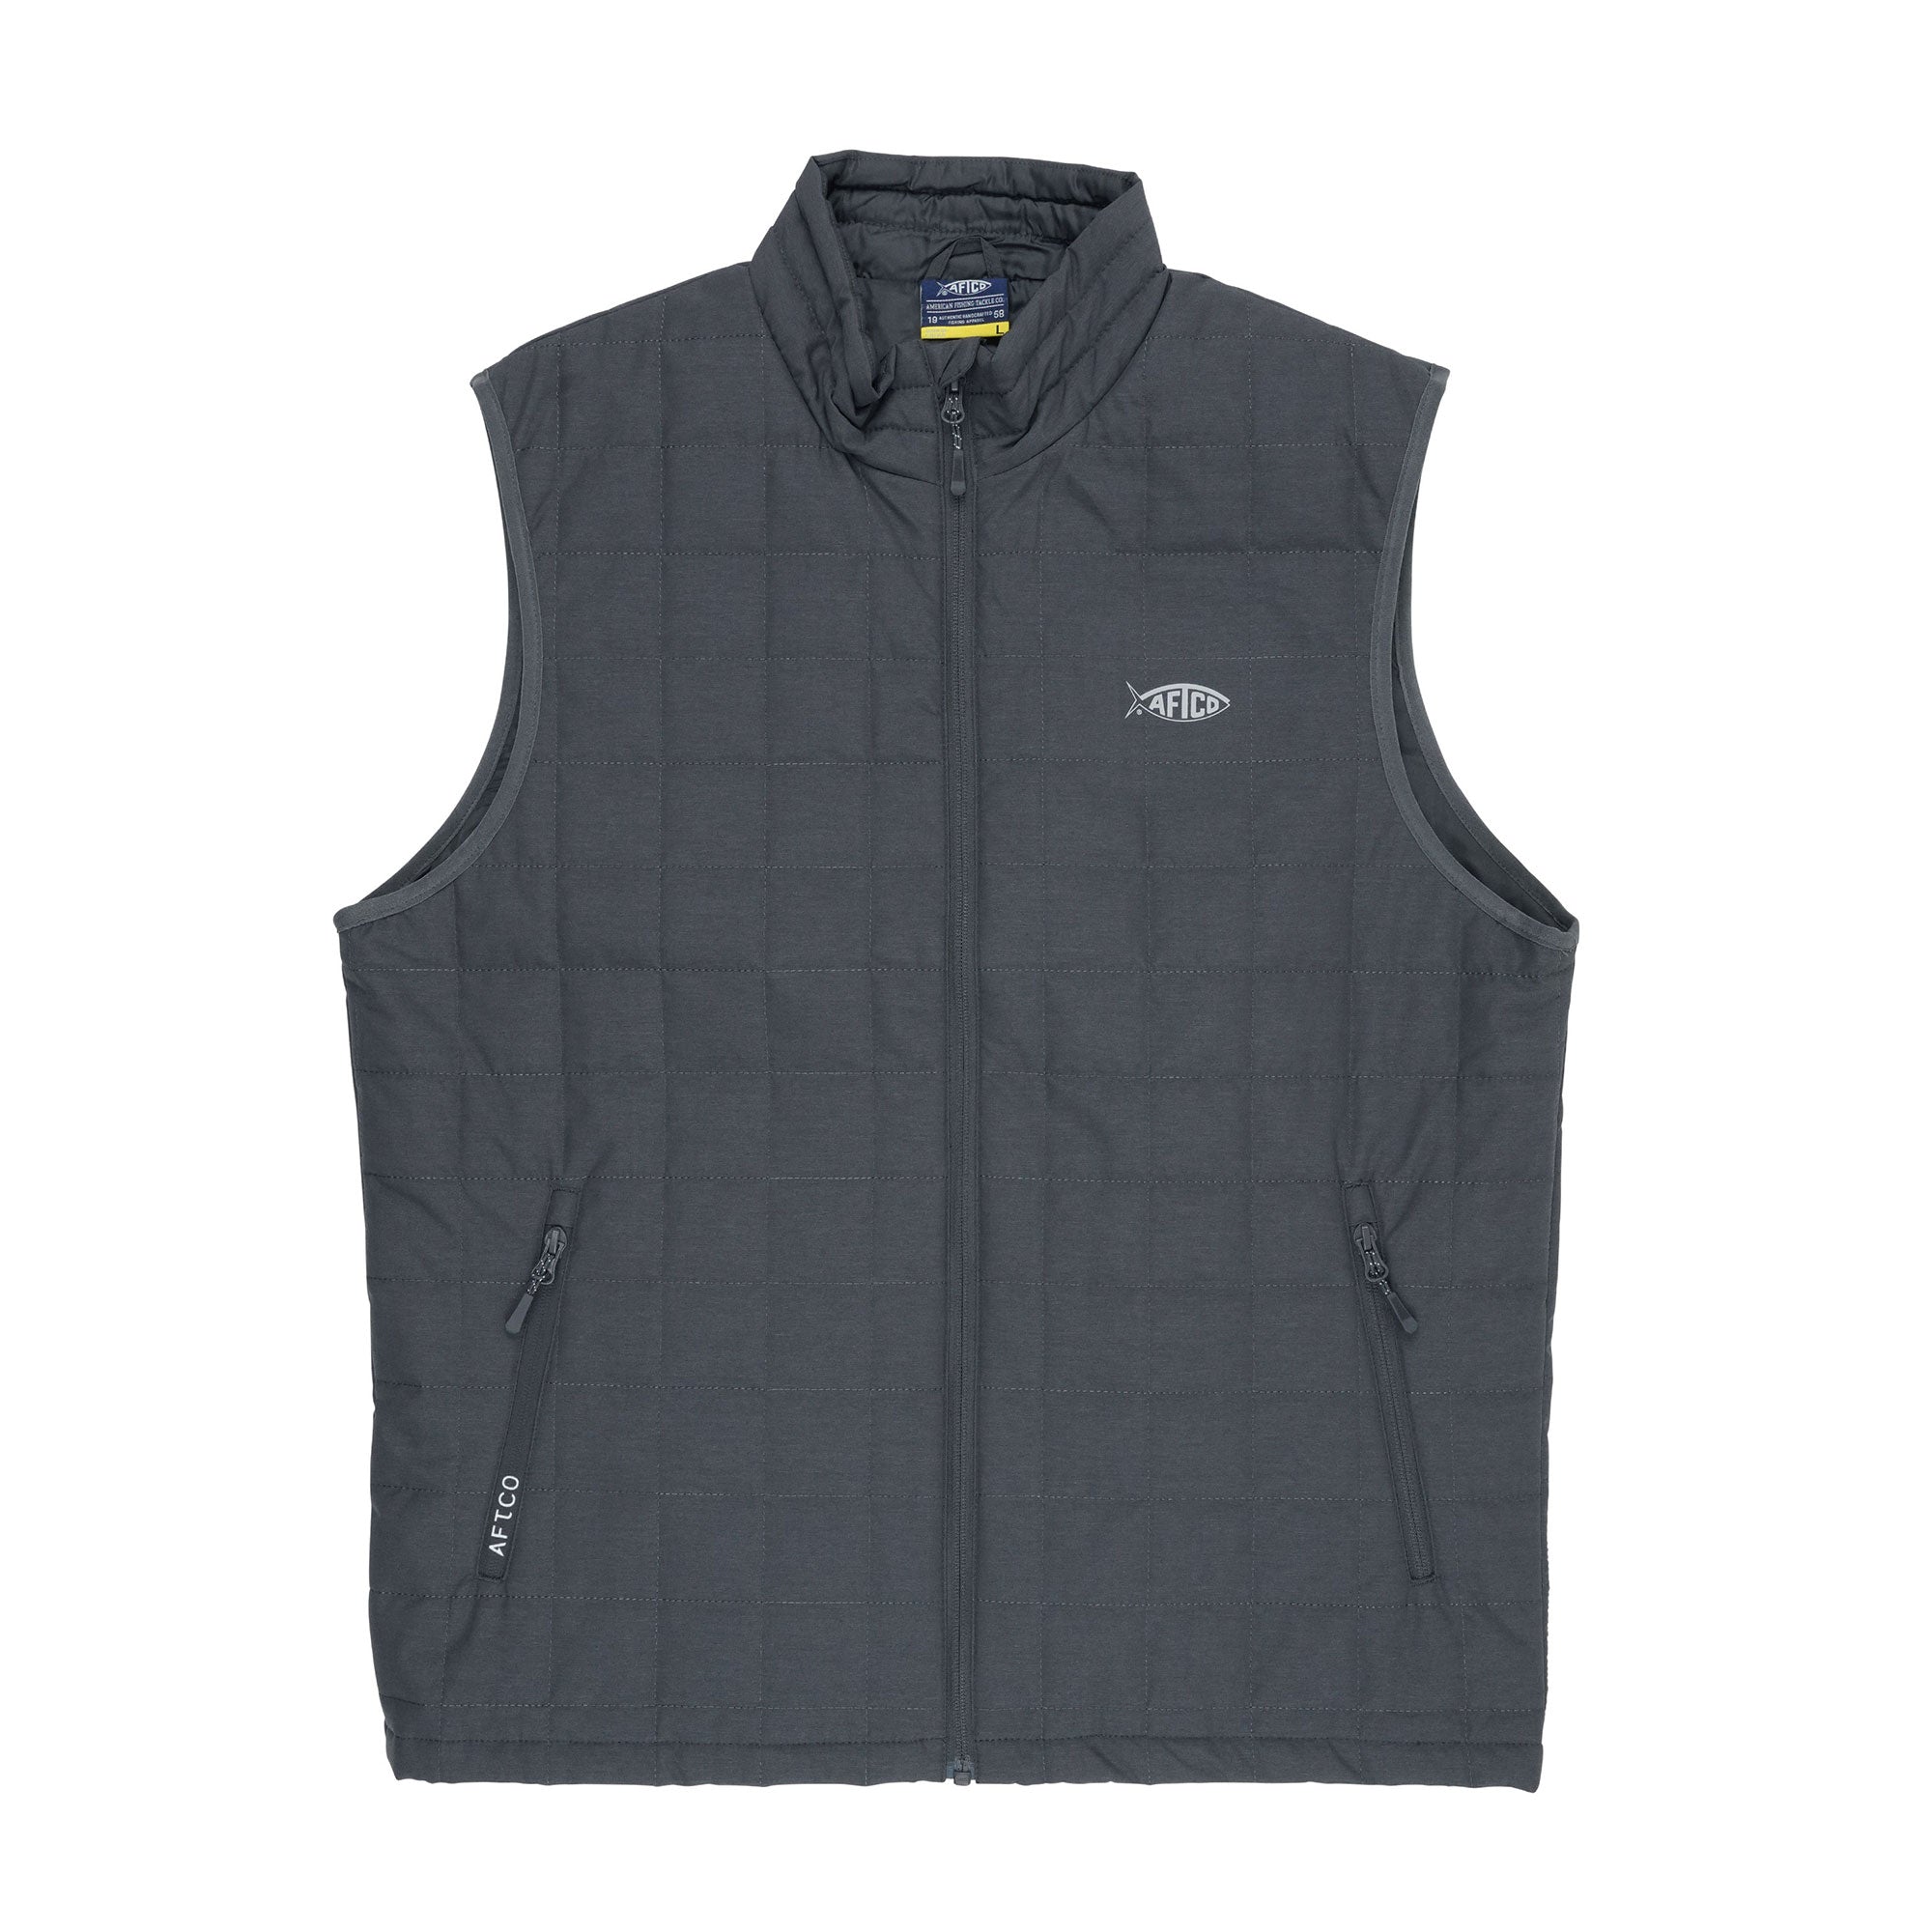 AFTCO Pufferfish 300 Vest - Charcoal Heather - XL